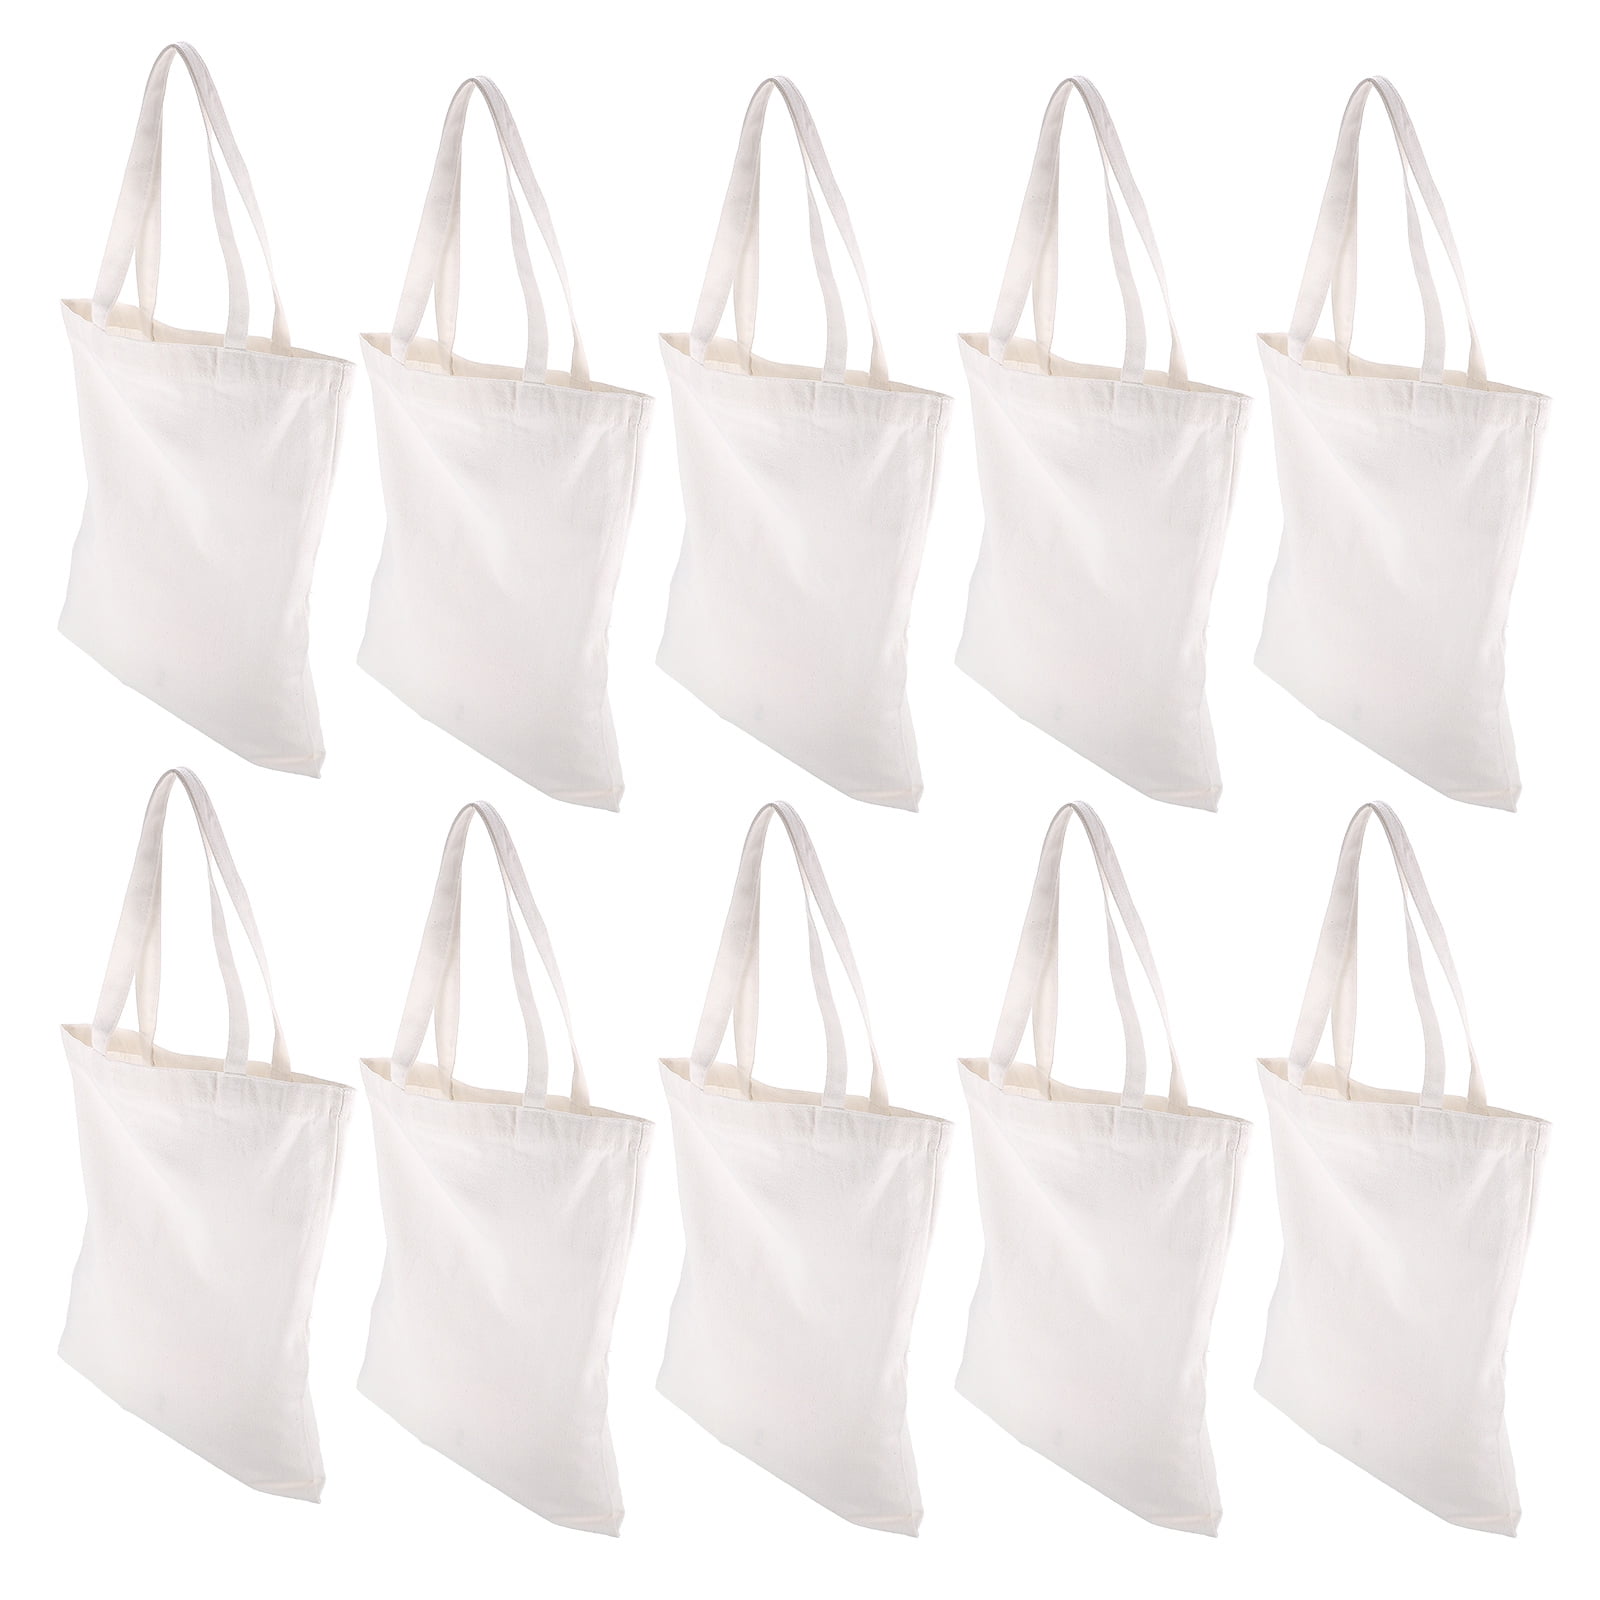 Sanwuta 9 Pack Christmas Canvas Tote Bags Blank Cotton Bags Plain Tote Bag  Plain Strong Reusable Grocery Bags Large Bulk Shopping Bag with Handles for